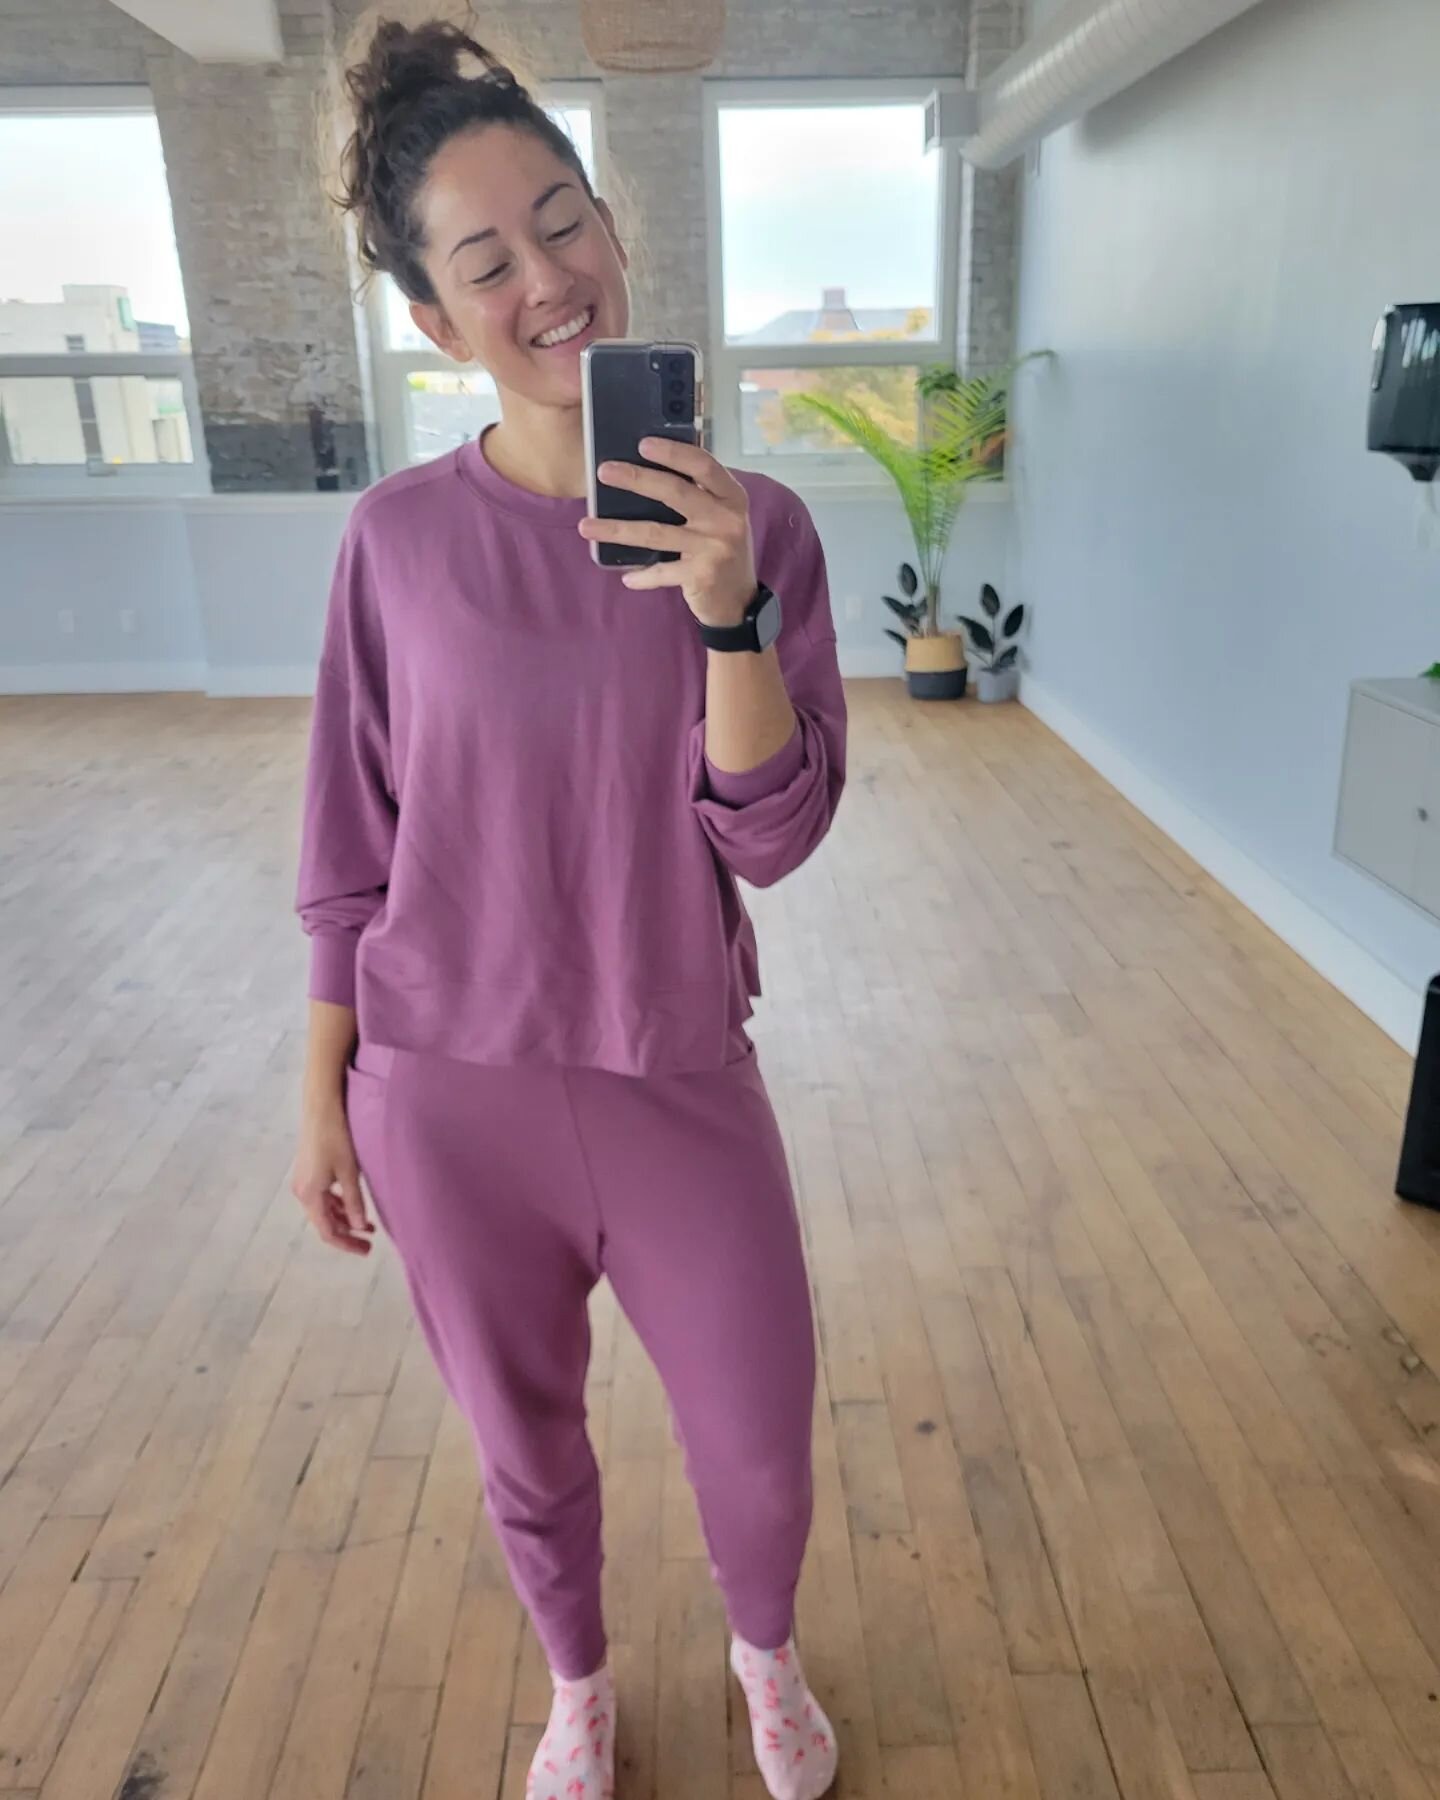 Full disclosure. I wore this for my workout last night...and yes then I put it back on this morning to be cozy in the car on my way to Toronto but that's besides the point 🤣
.
The point is that there are enough barriers to get our workouts in so why